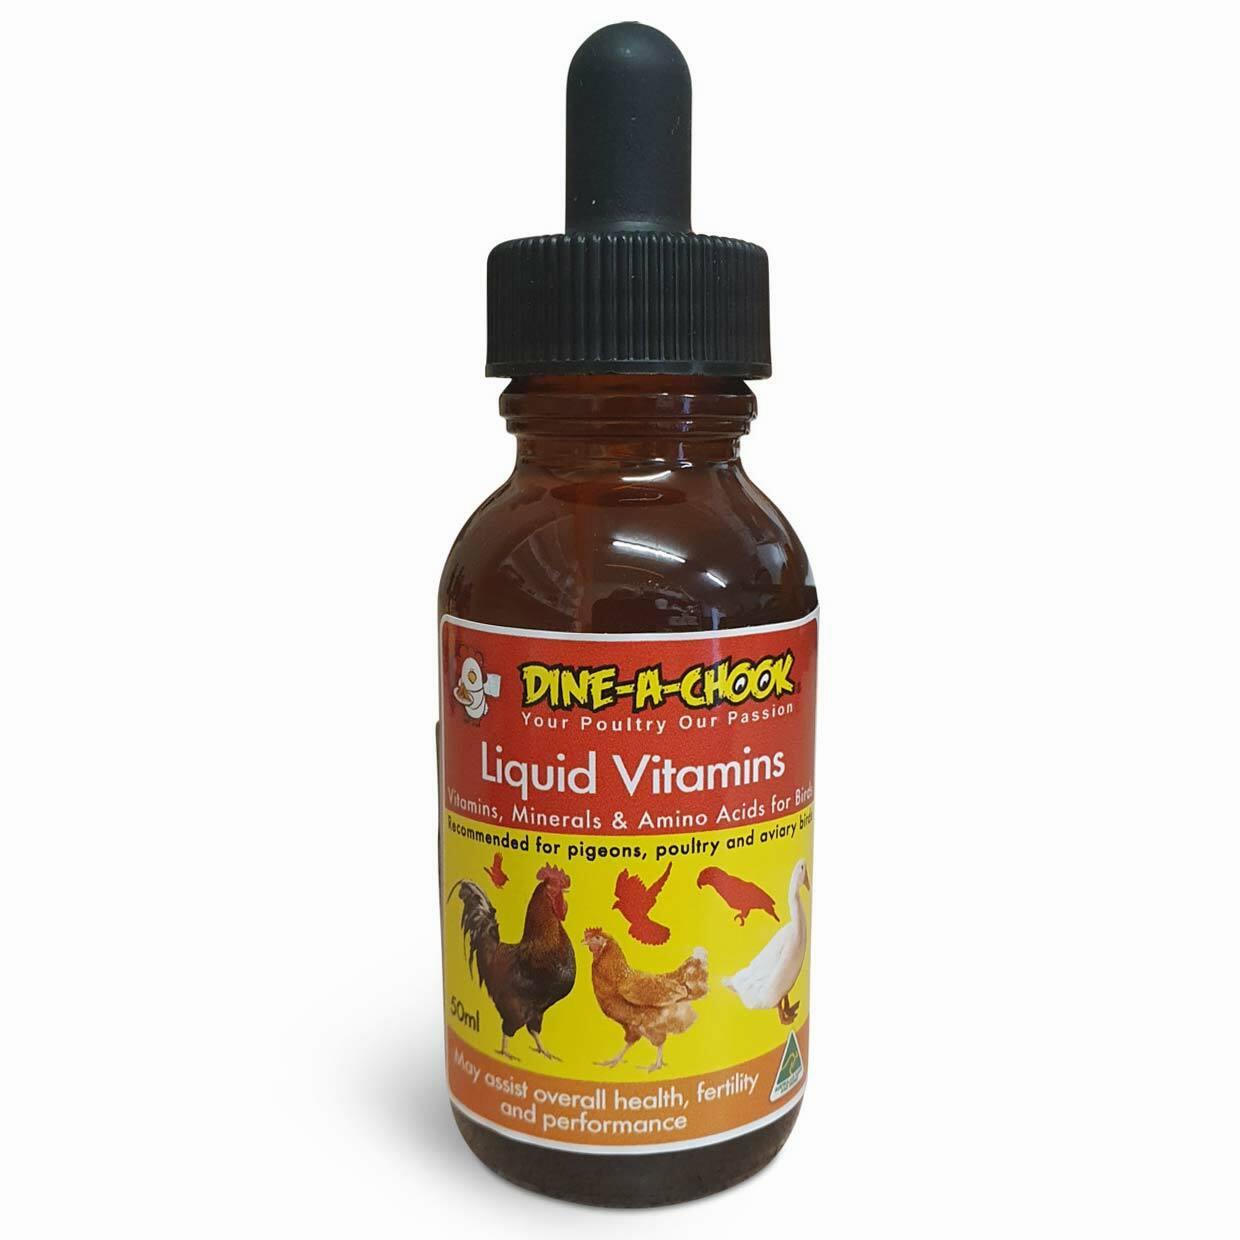 A small brown glass bottle of liquid vitamins for birds.